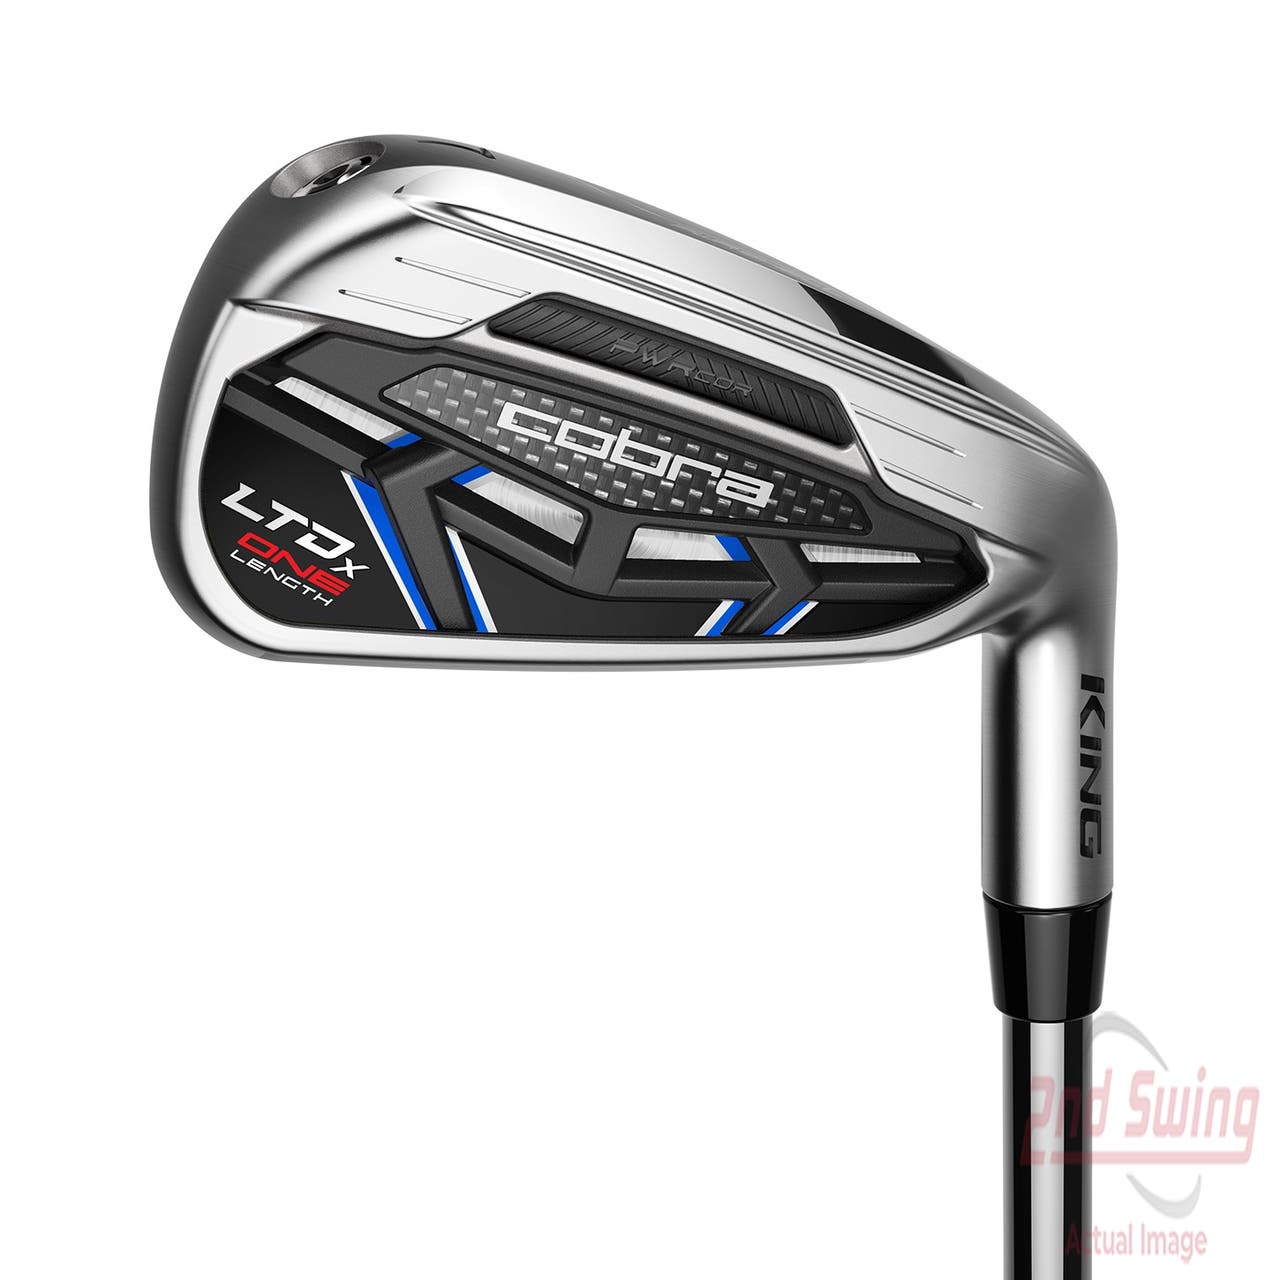 New Cobra LTDx One Length Iron Set 5-GW KBS Tour Steel Stiff Right Handed Standard 37.25in